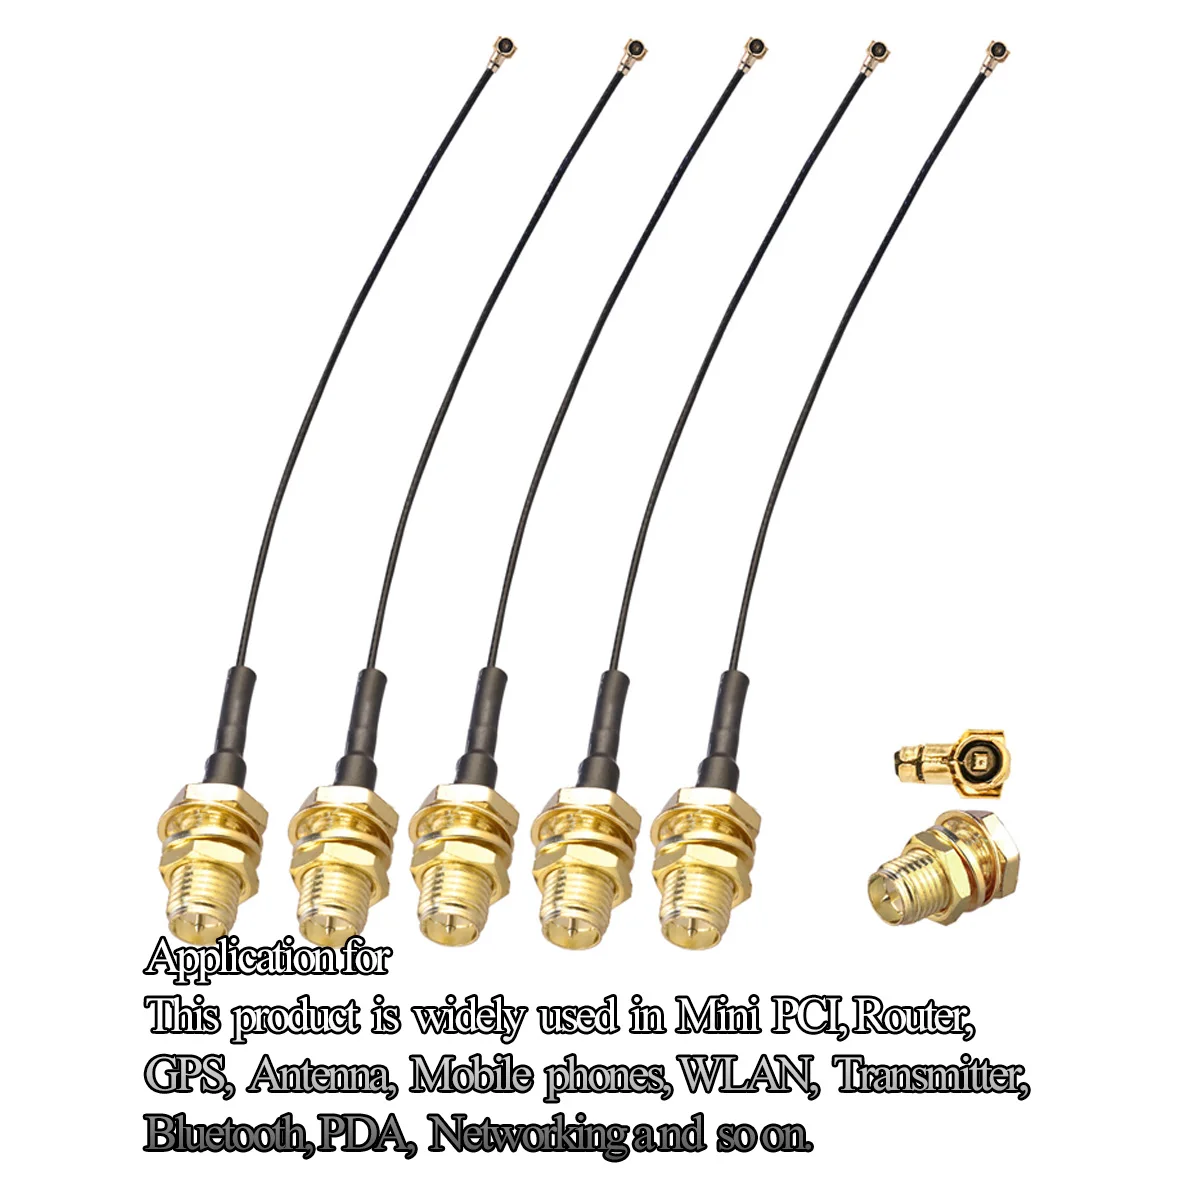 5pcs IPX to RP SMA Female WiFi Antenna Cable 0.81mm U.fl IPX to RP SMA Female Antenna Cable Mini PCI to RP SMA Female  Cable